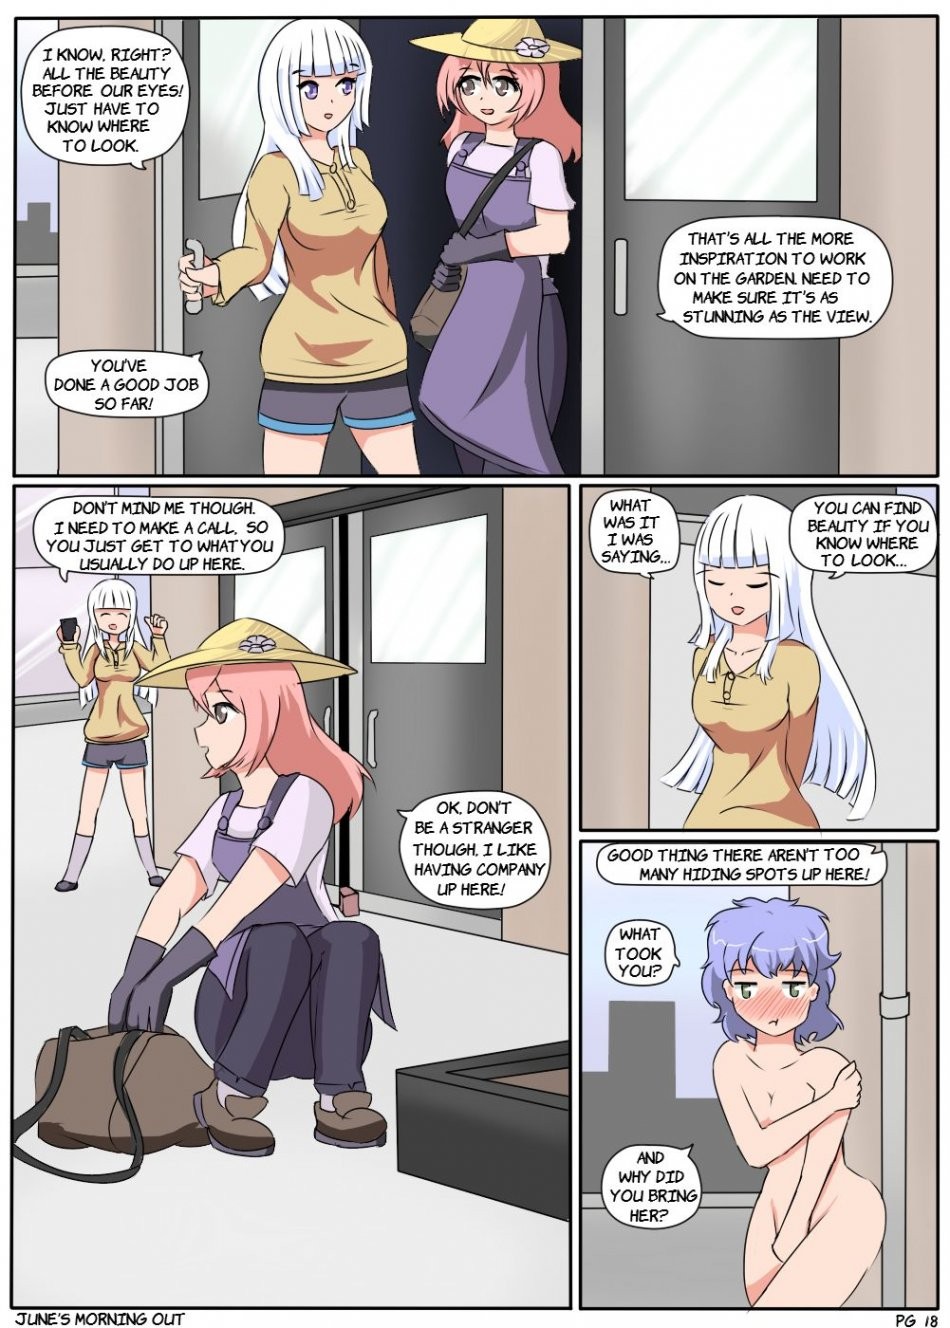 June's Morning Out porn comic picture 18